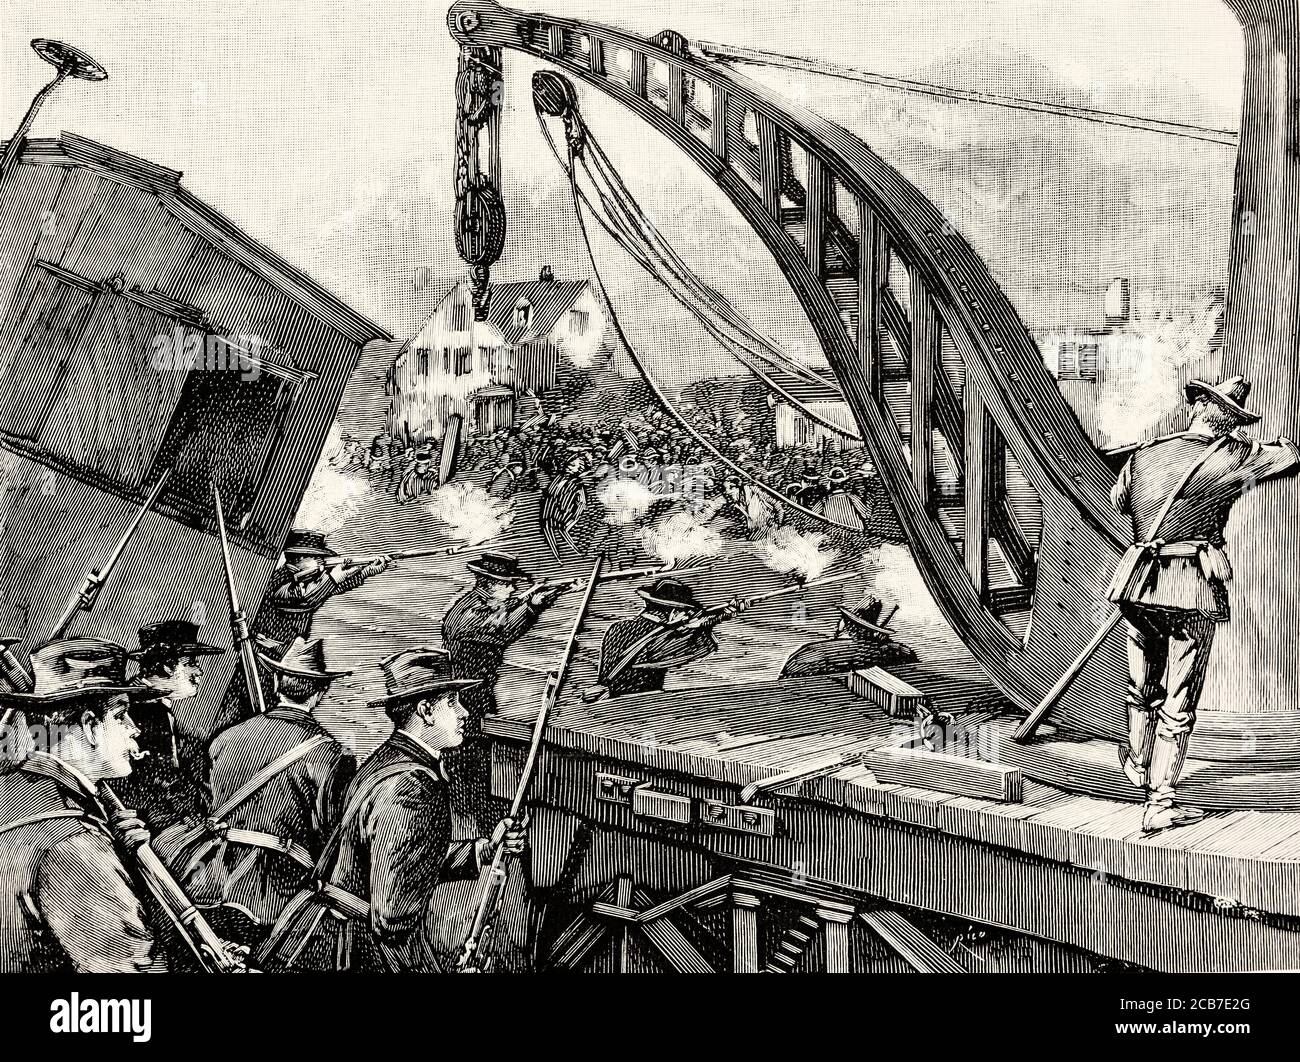 Federal troops open fire on rioters in Chicago during the Great Railroad Strike of 1894. United States of America. Old XIX century engraved illustration from La Ilustracion Española y Americana 1894 Stock Photo